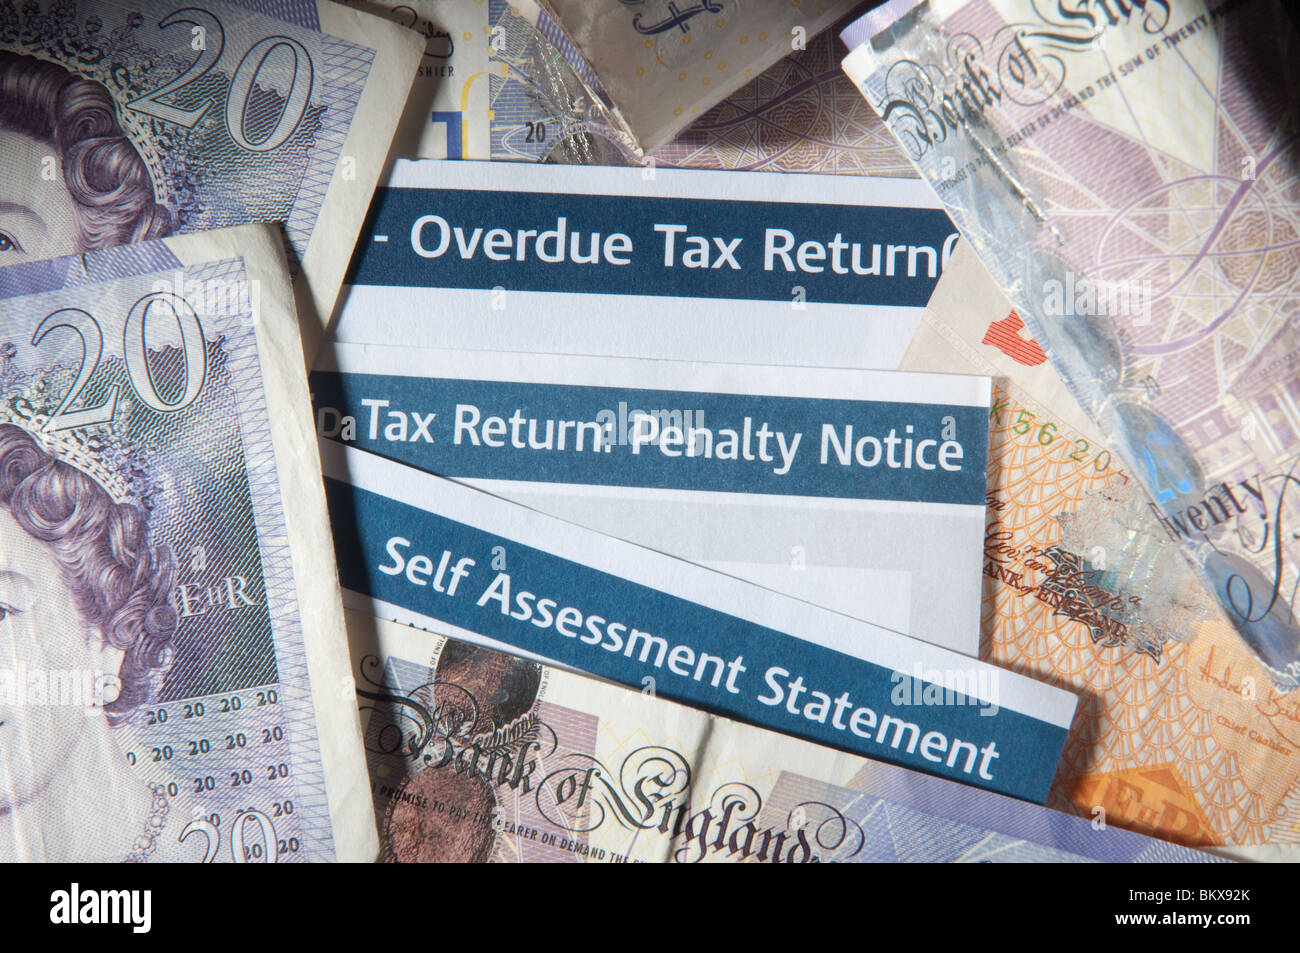 self-assessment-tax-return-and-penalty-tax-notice-s-surrounded-by-ten